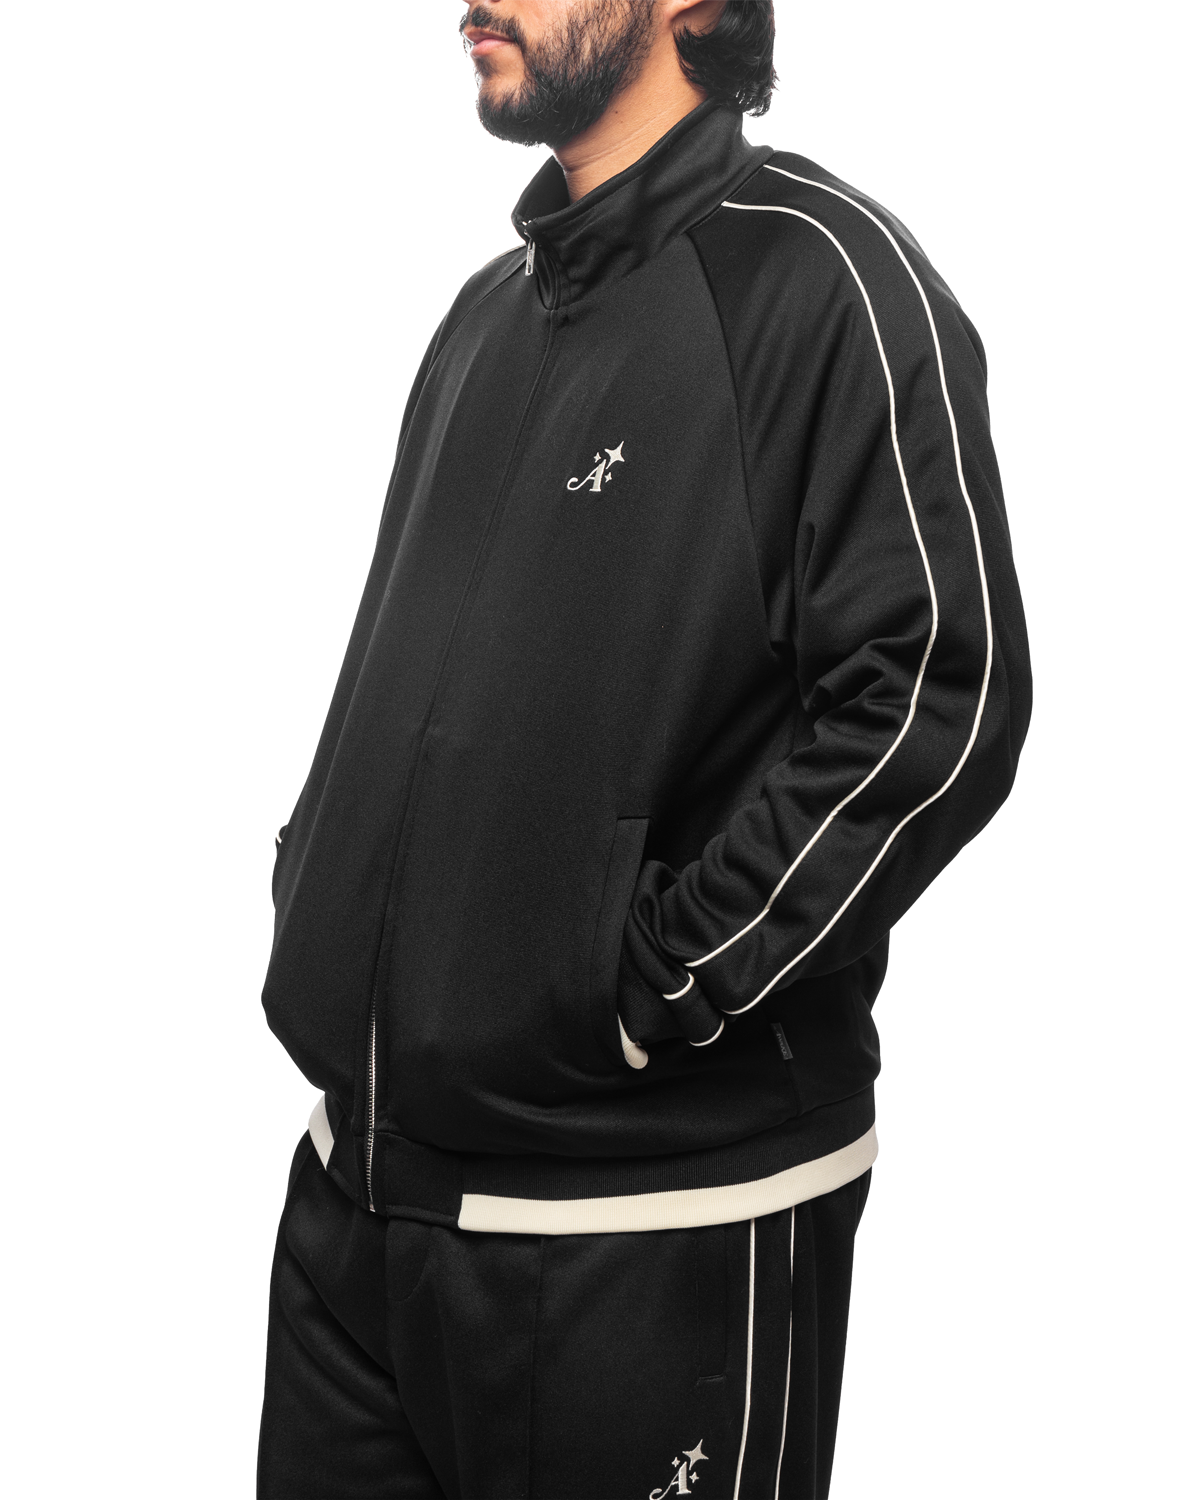 Star "A" Embroidered Track Jacket Black